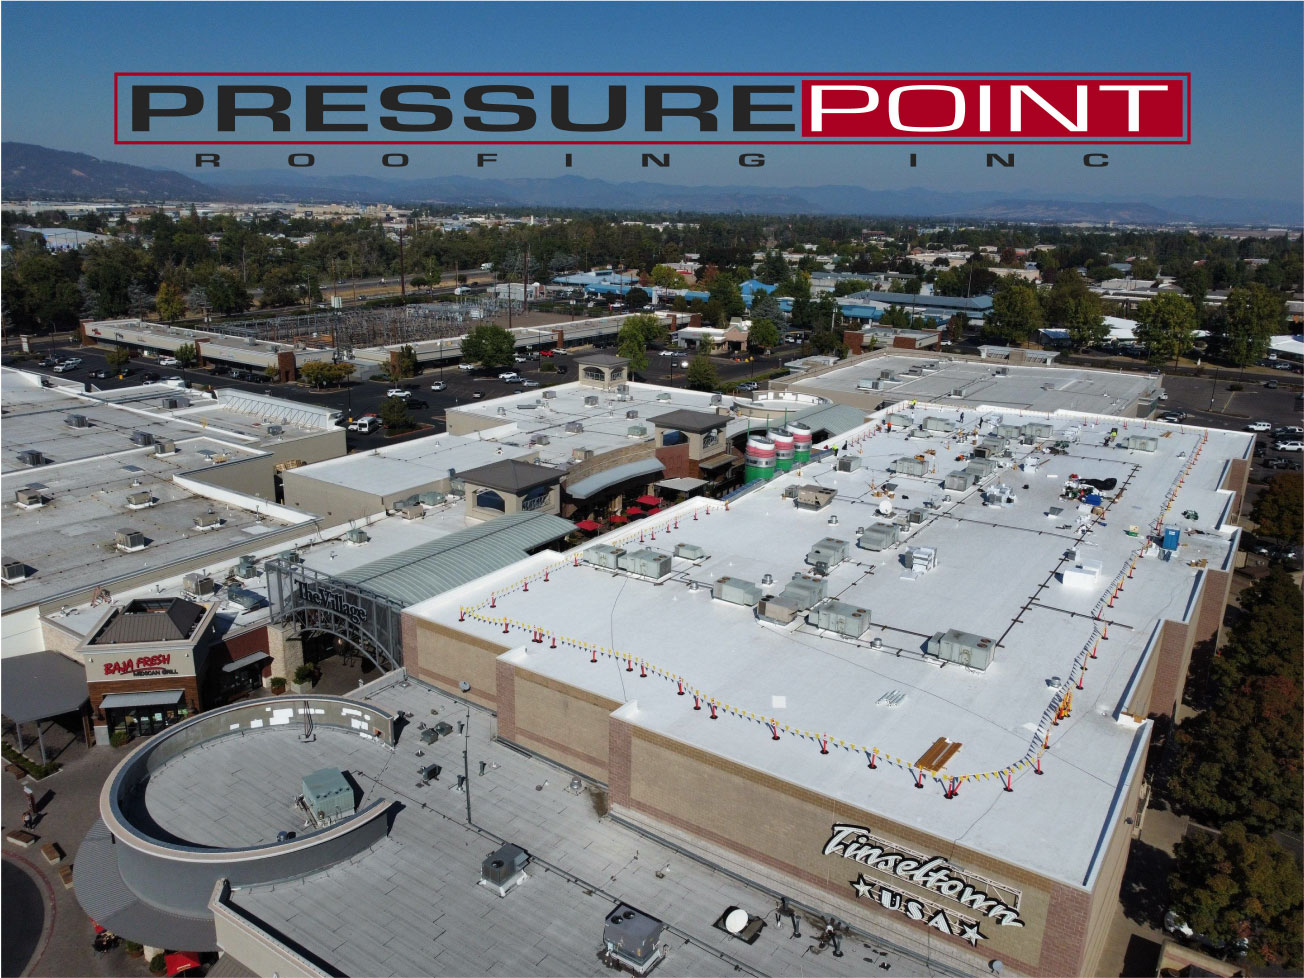 Pressure Point Roofing Inc.